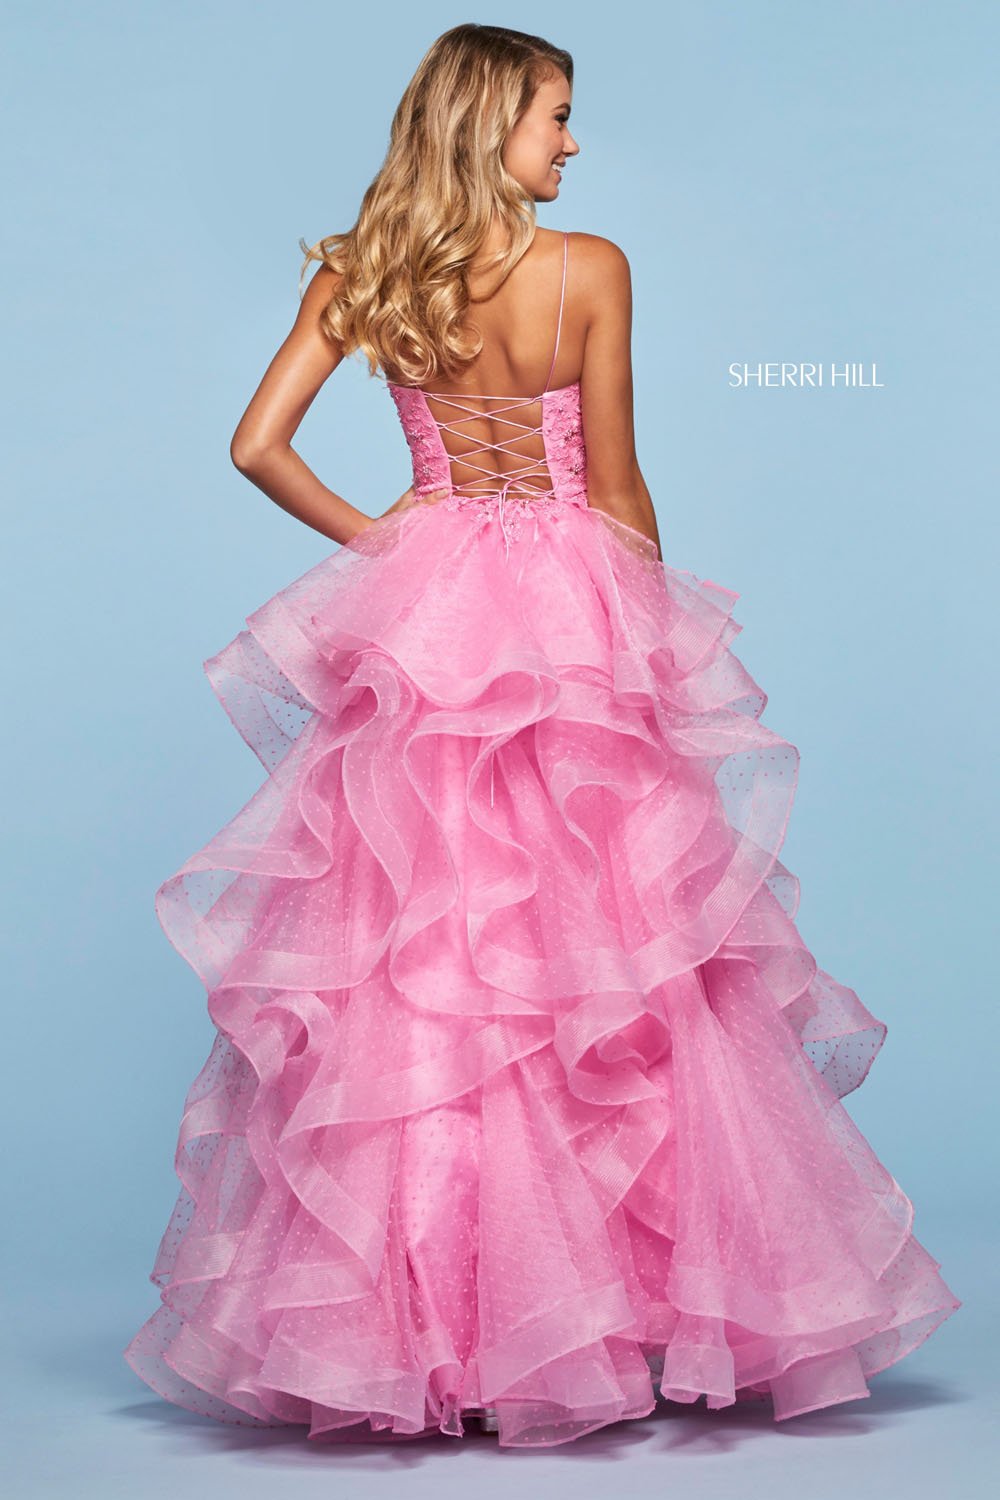 Sherri Hill 53418 dress images in these colors: Yellow, Black, Blush, Light Blue, Lilac, Periwinkle, Candy Pink, Coral, Navy.